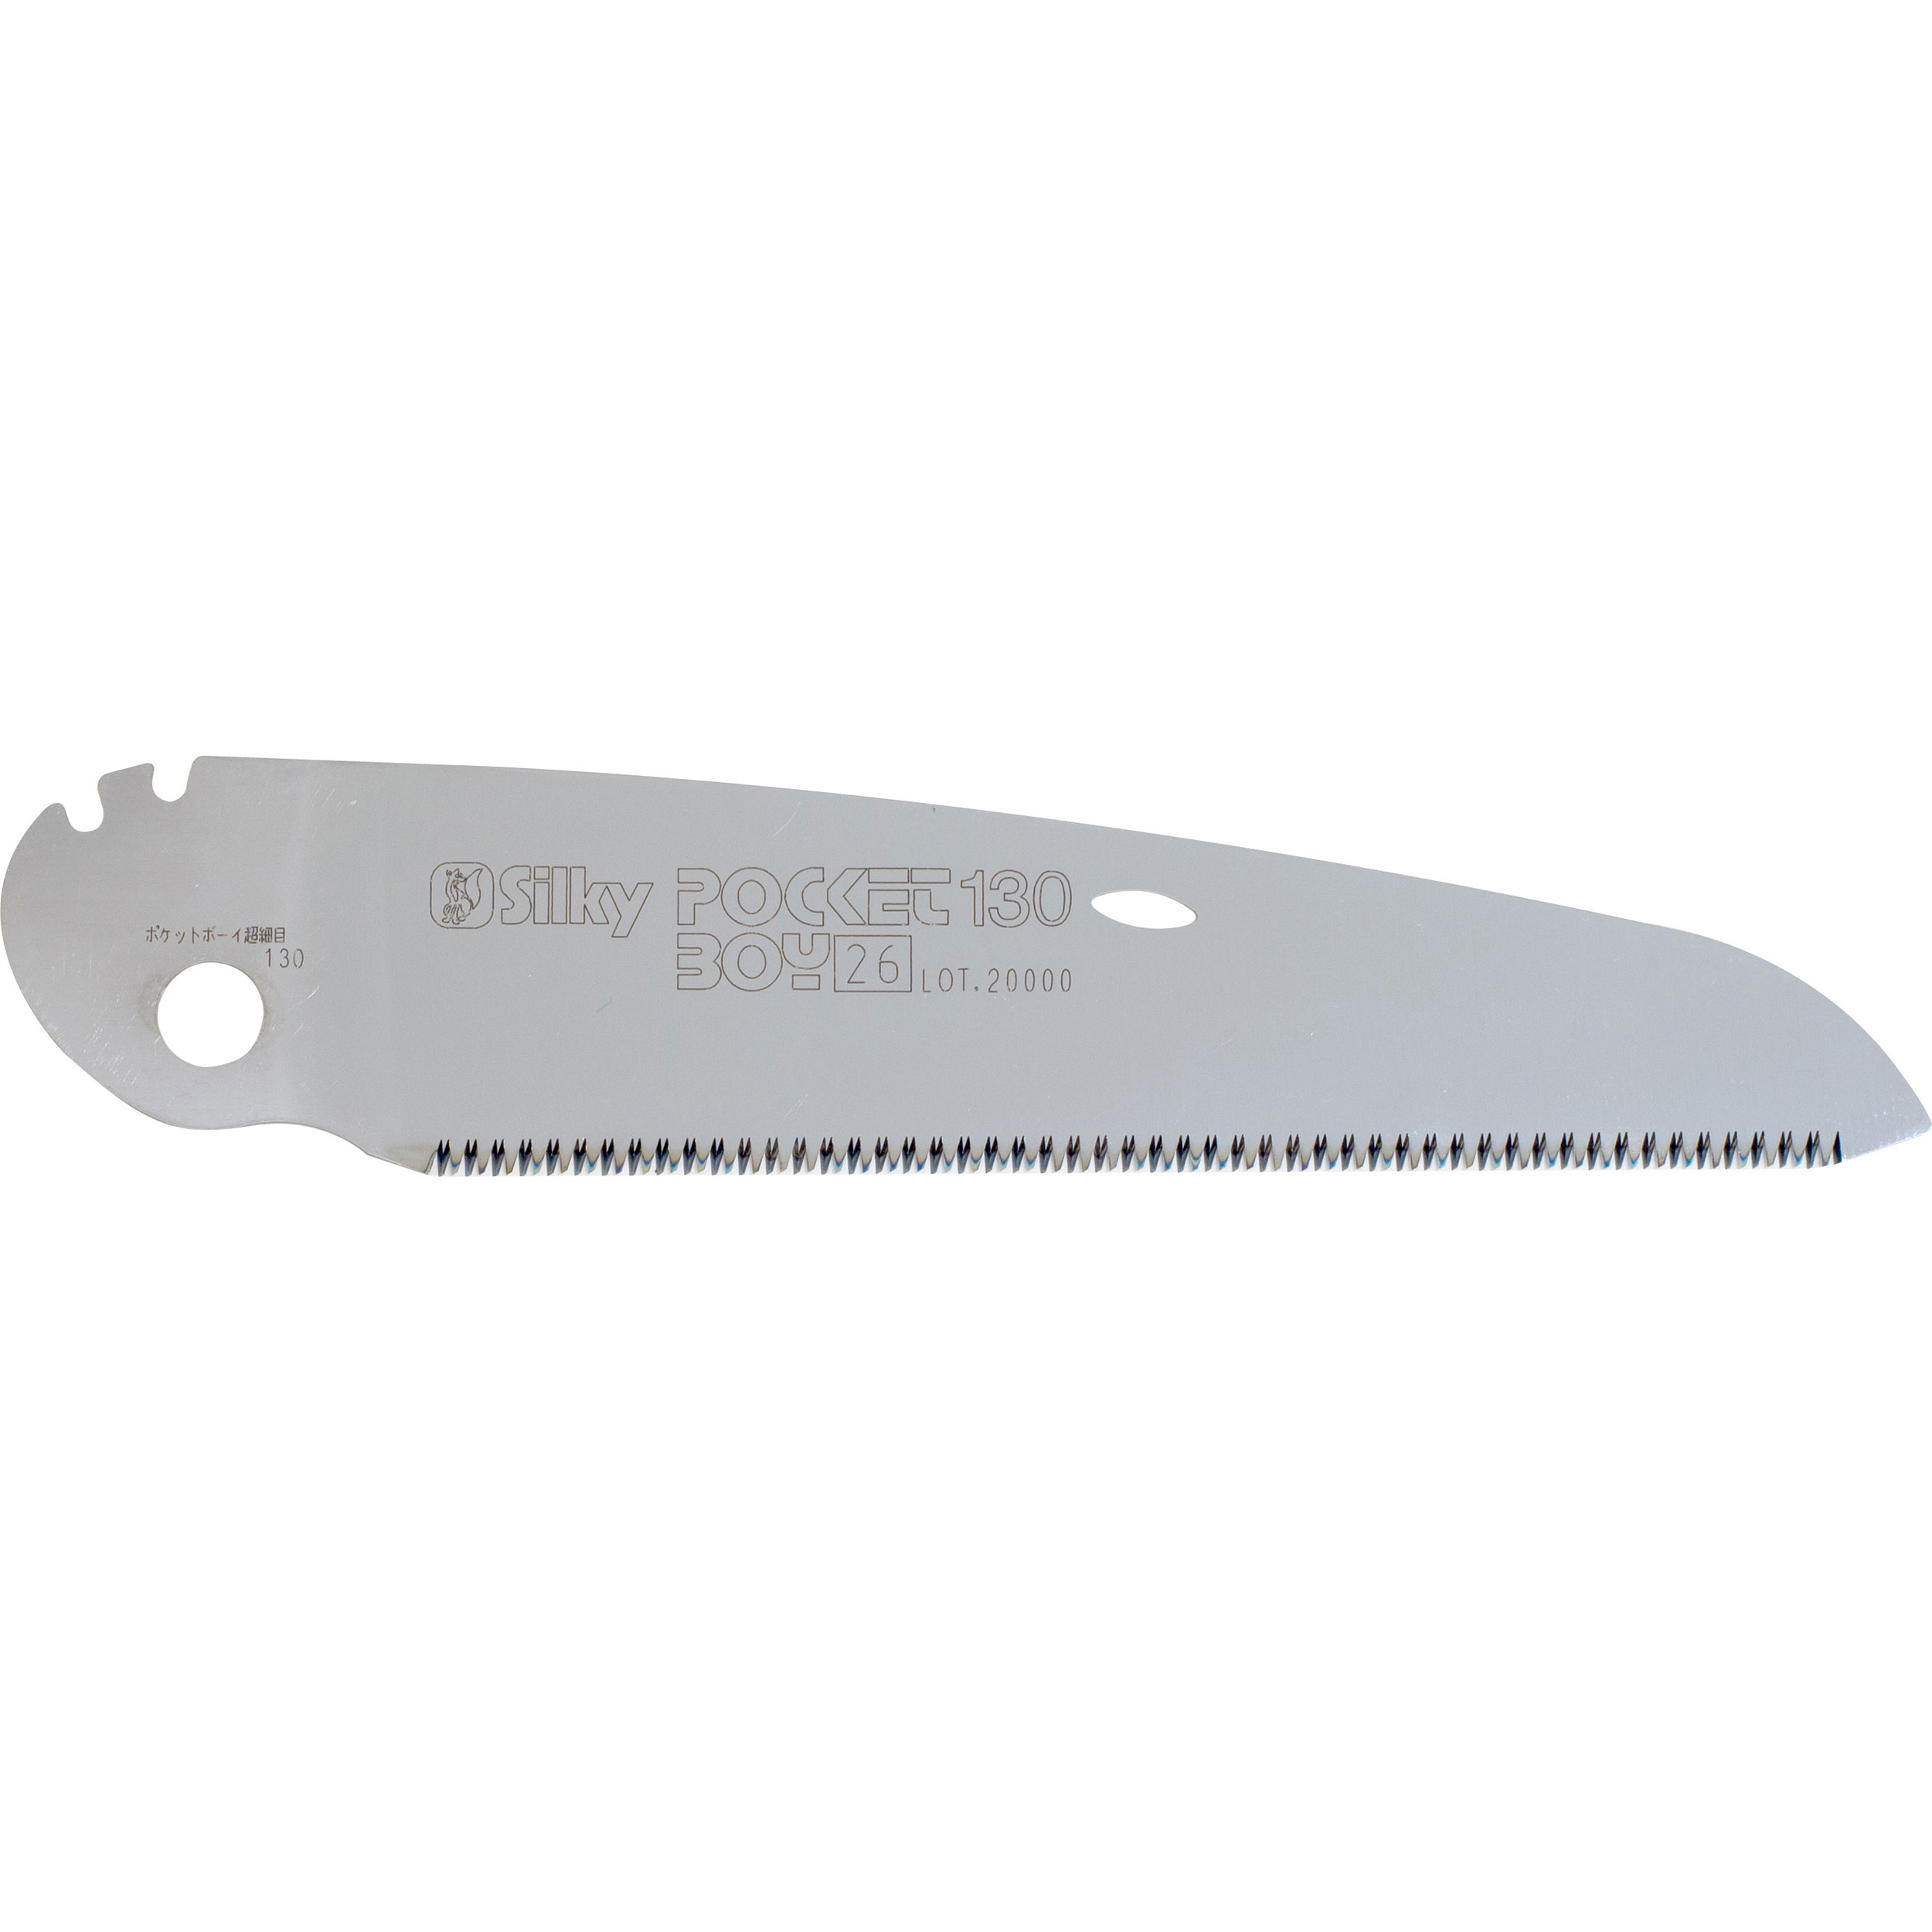 Pocketboy Replacement Blade, 170mm, Extra Fine Teeth